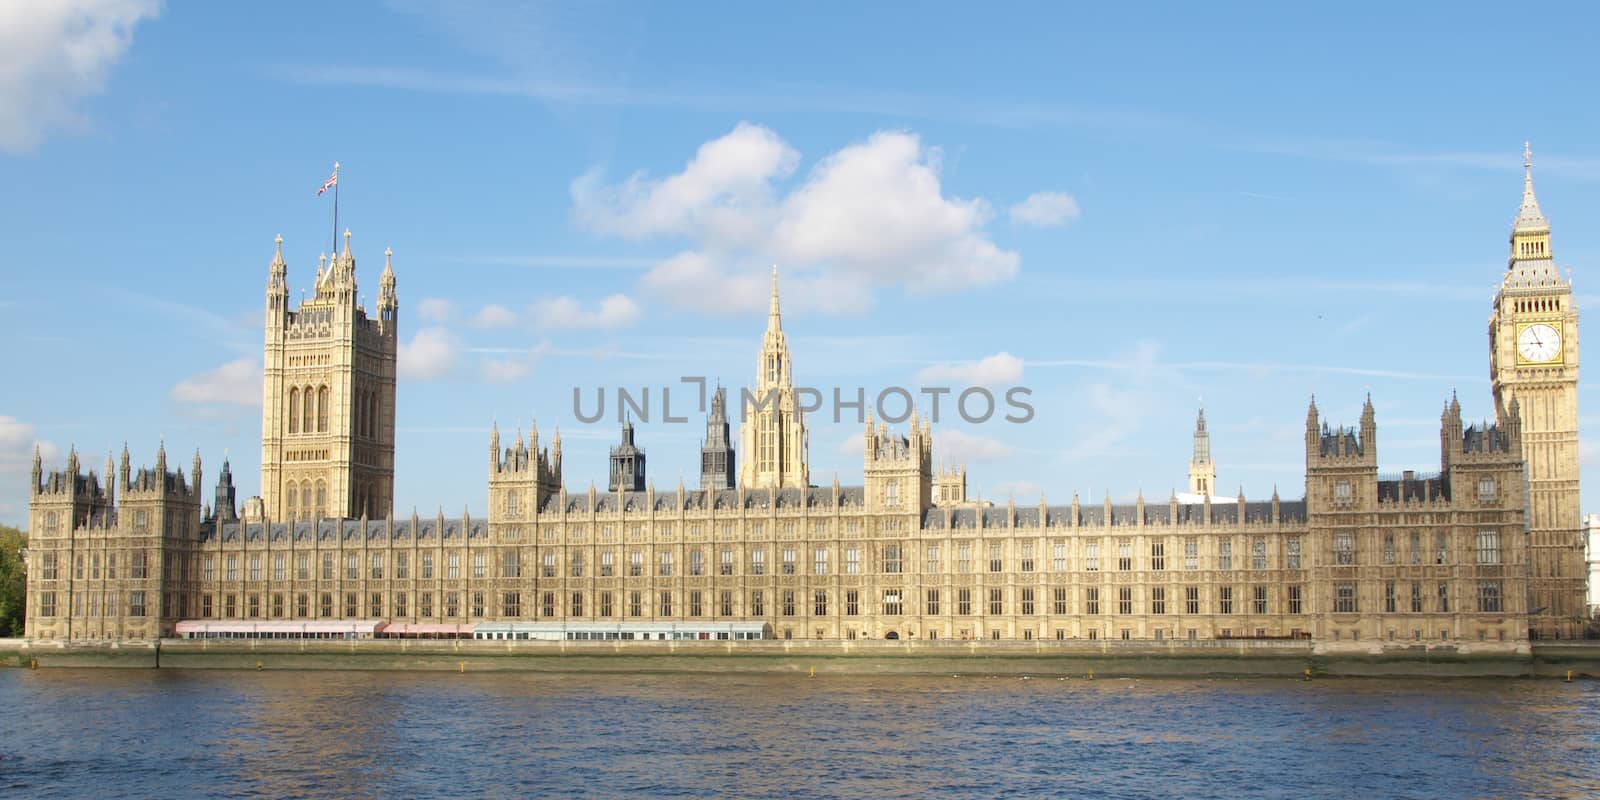 Houses of Parliament, Westminster Palace, London gothic architecture